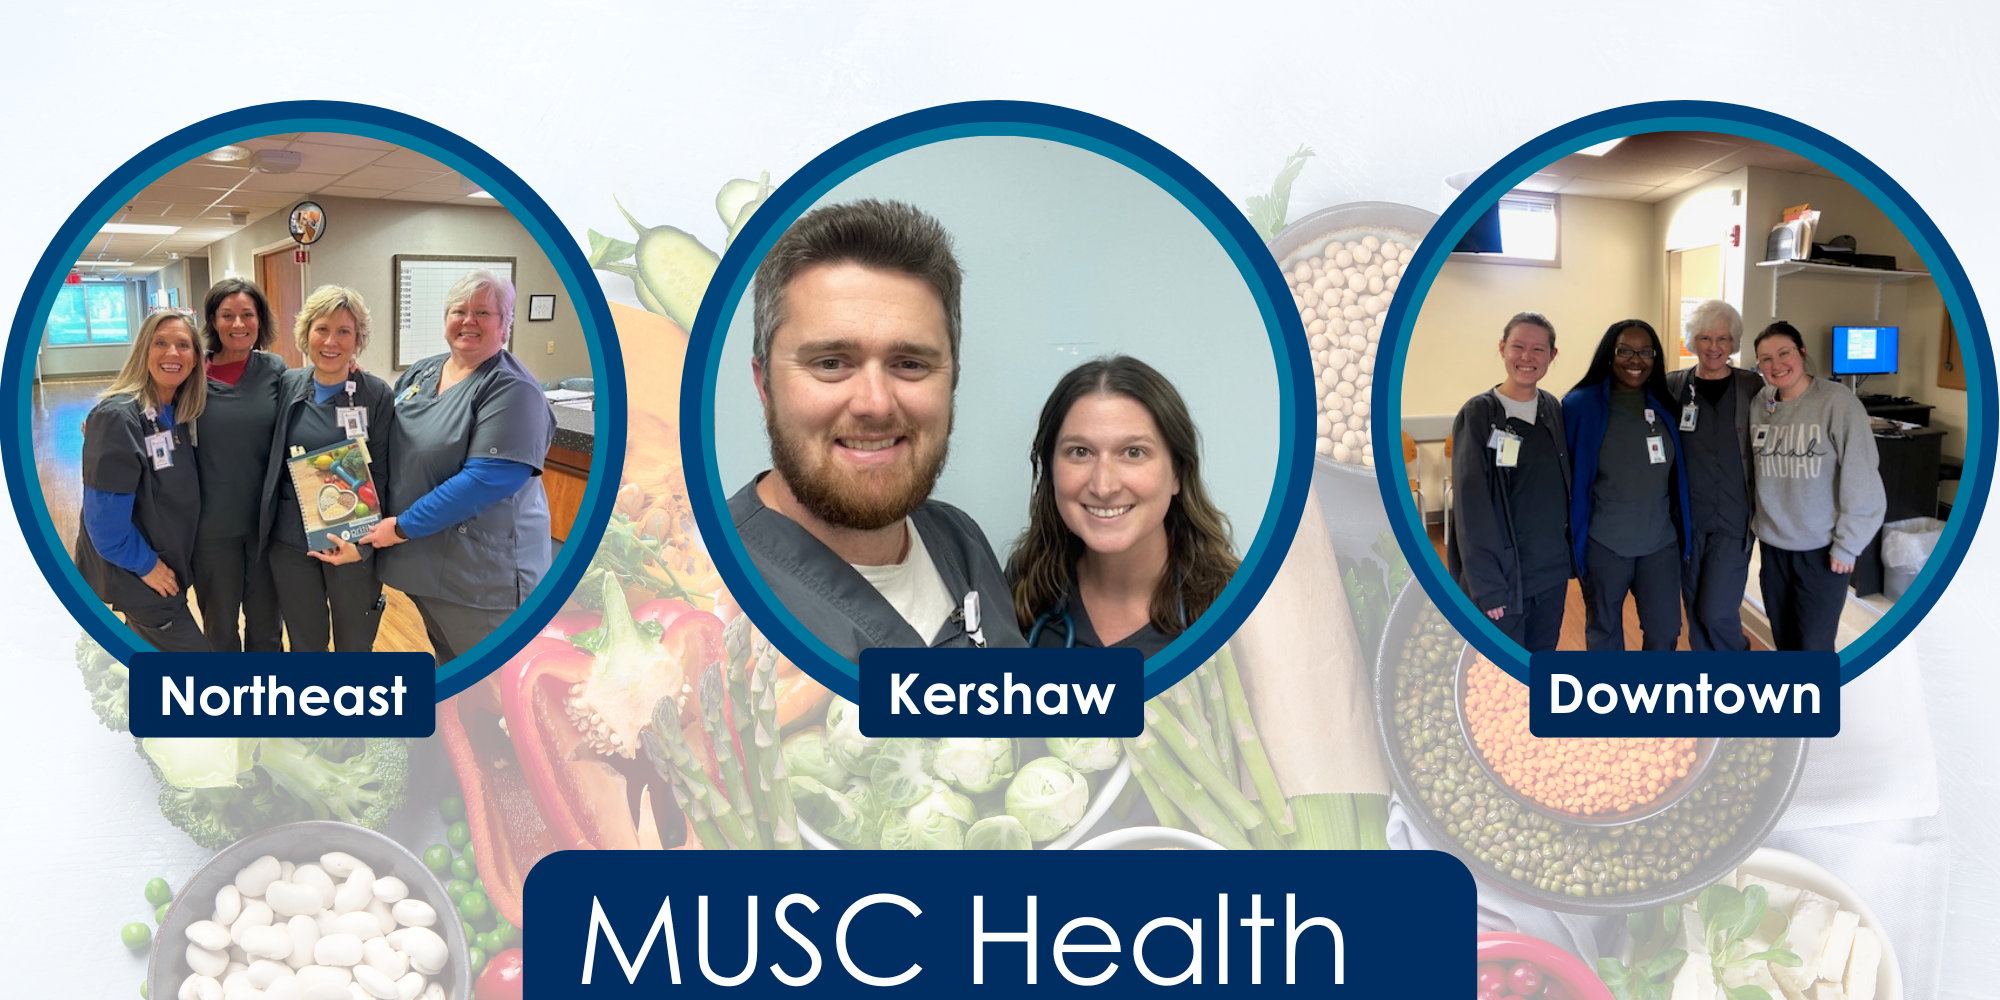 Against a muted backdrop of fresh vegetables and dried legumes over a white background are three circular images, each of groups of MUSC Cardiac Rehab team members wearing scrubs. The first has four women with one holding a patient guidebook over the title "Northeast", next is a close up picture of  a man and woman over the title "Kershaw", lastly there is a photo of 4 women standing with their arms around eachother over the title "Downtown" below all three, is a title at the bottom of the entire image that reads "MUSC Health" 